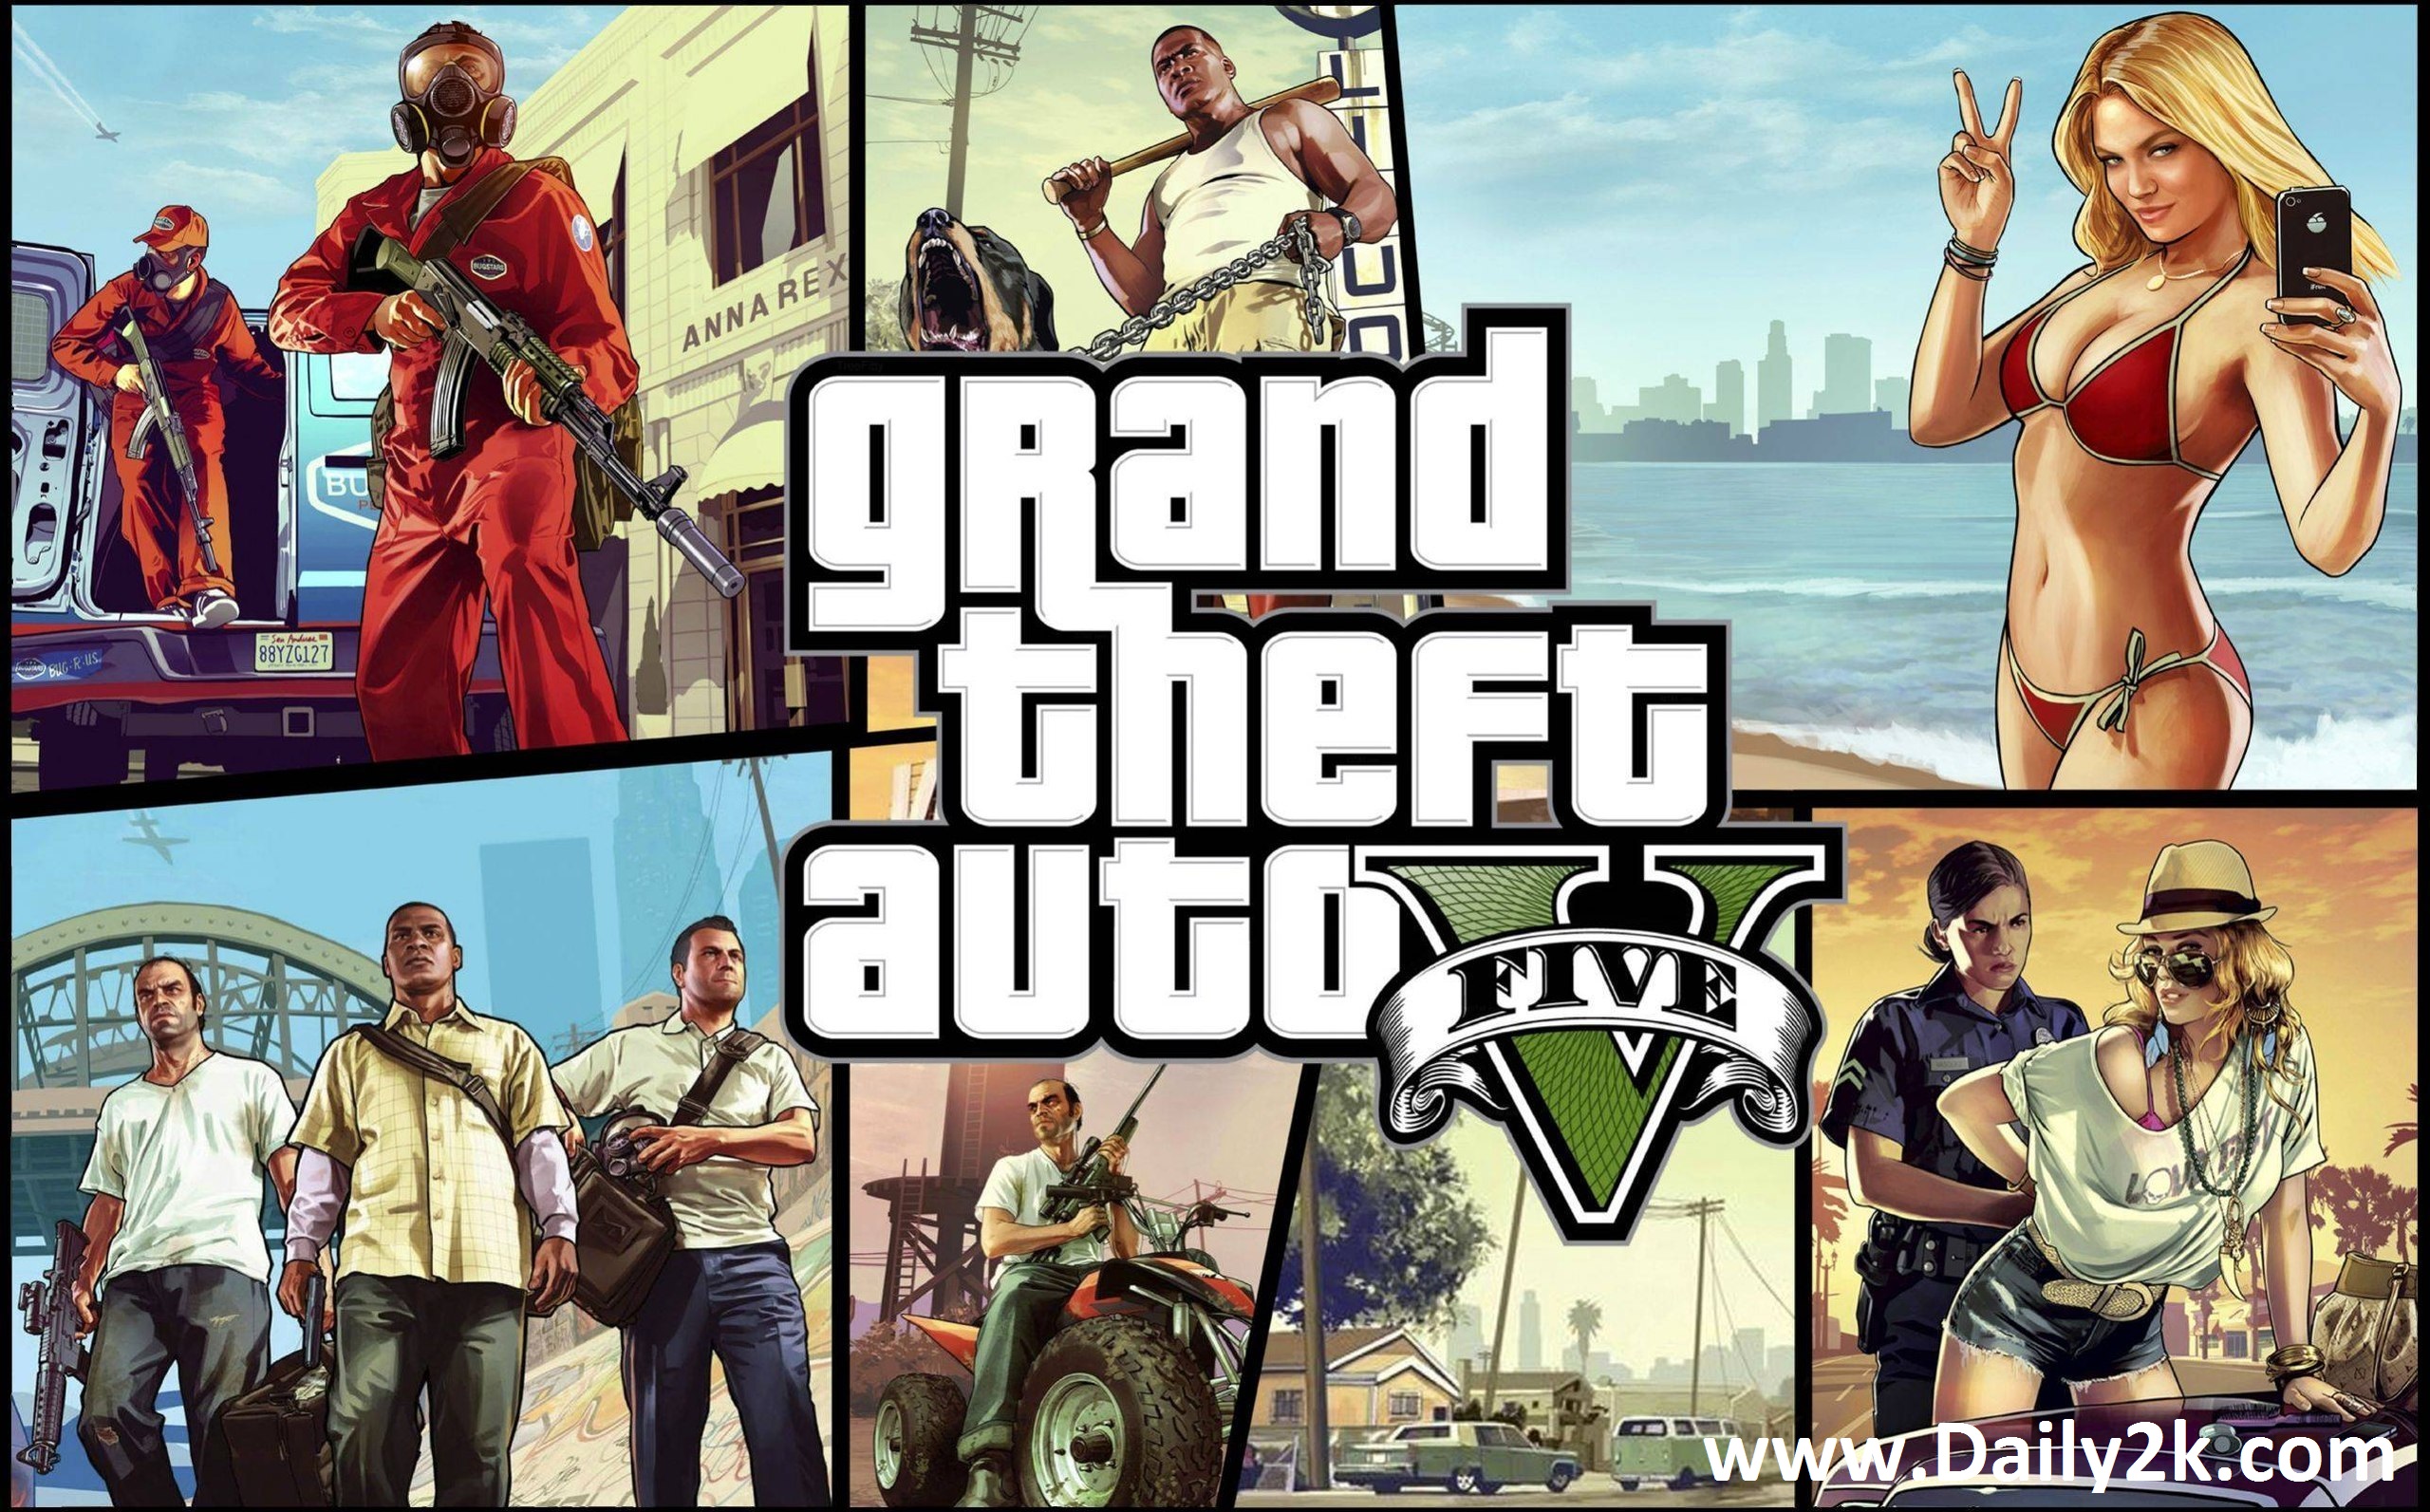 Grant Theft Auto 5 or GTA 5 Free Download